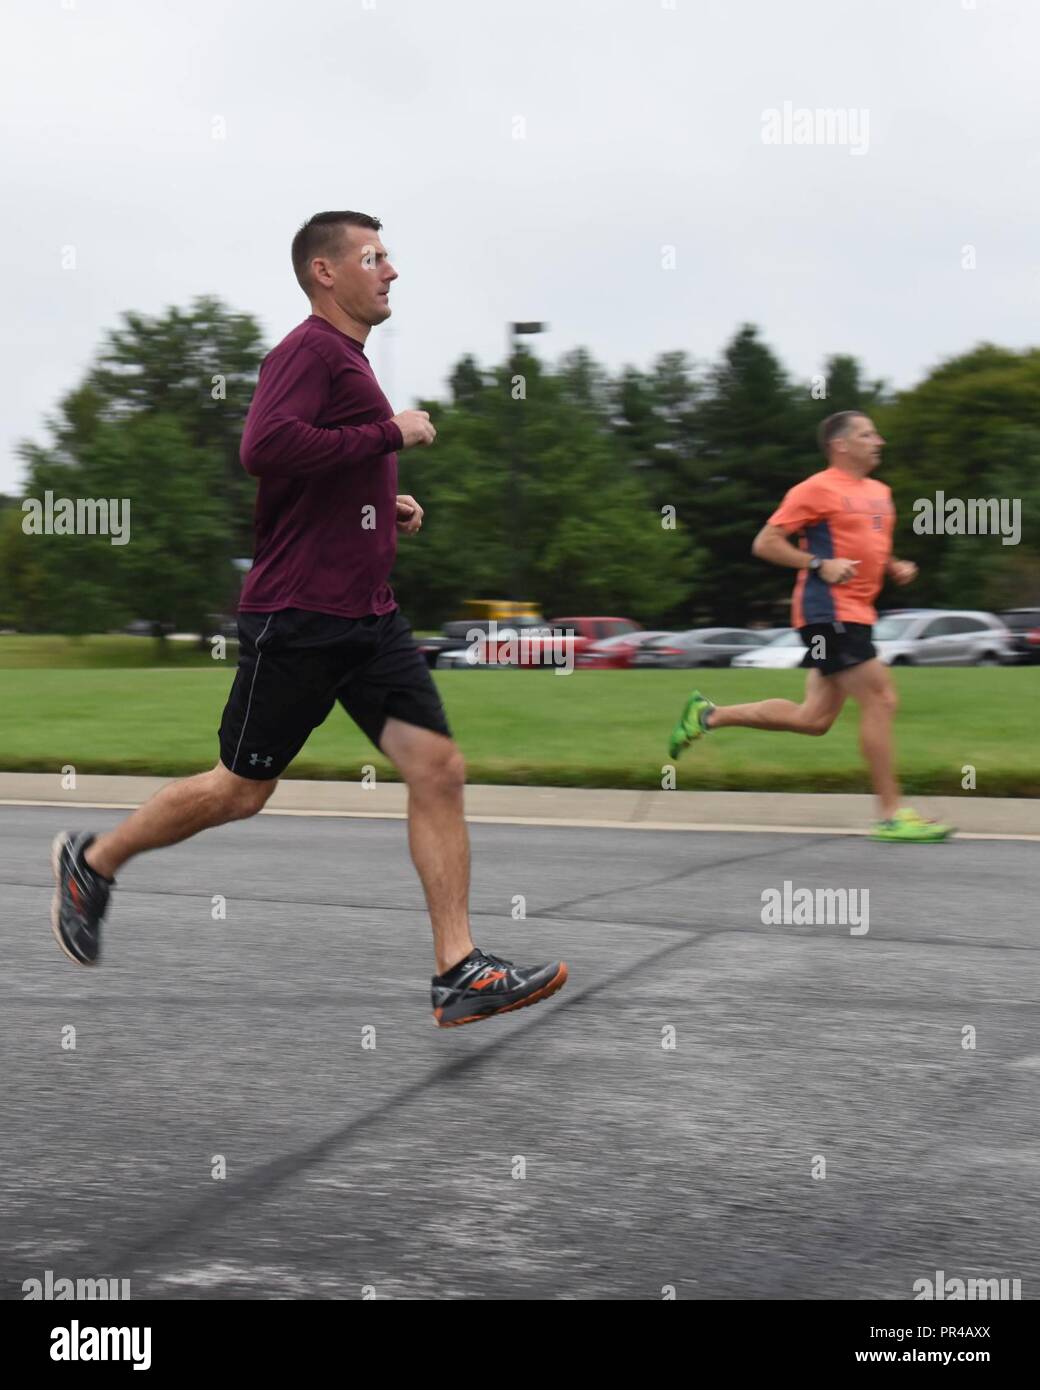 (from left) Senior Master Sgt. Christopher Mertz, 126th Air Refueling Wing first sergeant, and Col. Thomas Jackson, 126th Operations Group commander, participate in a 3K run Sept. 9, 2018, at Scott Air Force Base, Ill. The wing hosted the run in honor of Suicide Prevention Month. Stock Photo